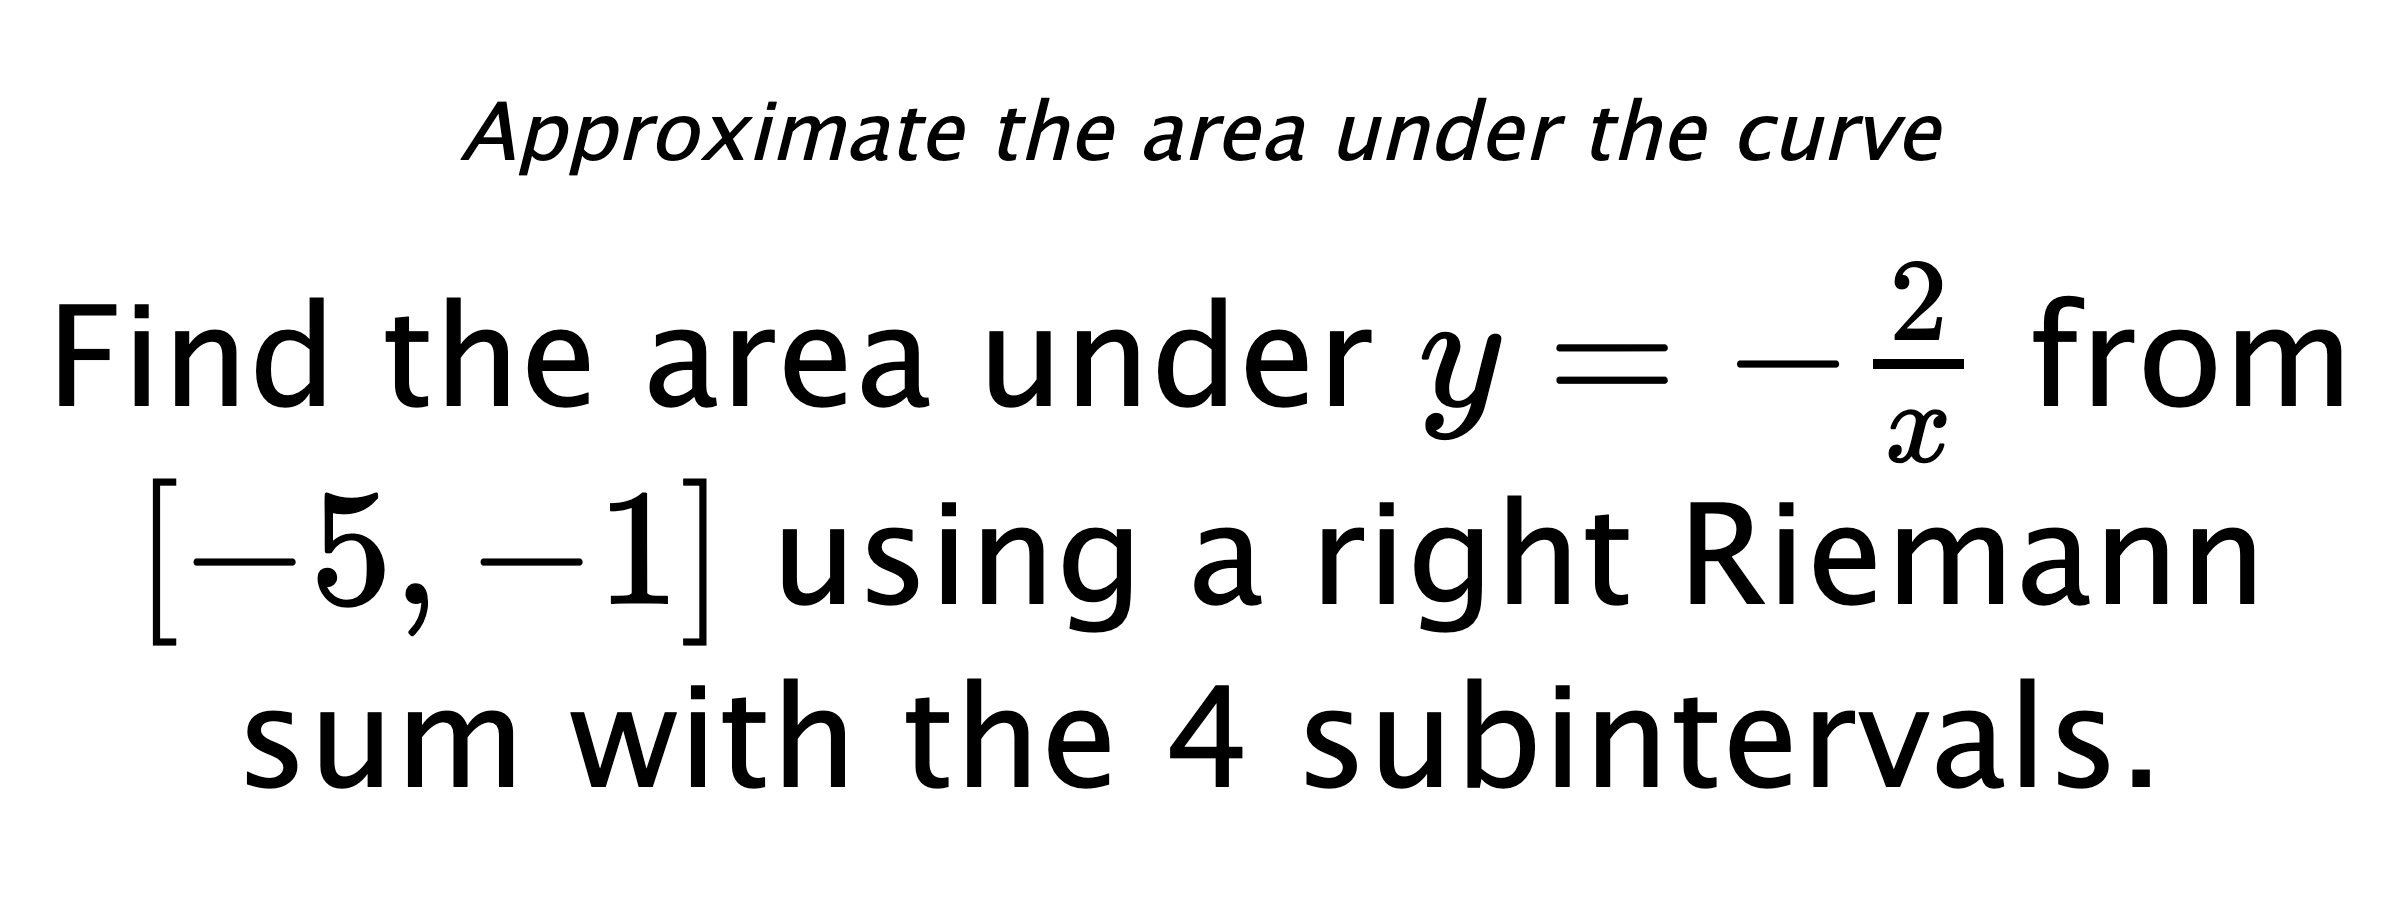 Approximate the area under the curve Find the area under $ y=-\frac{2}{x} $ from $ [-5,-1] $ using a right Riemann sum with the 4 subintervals.